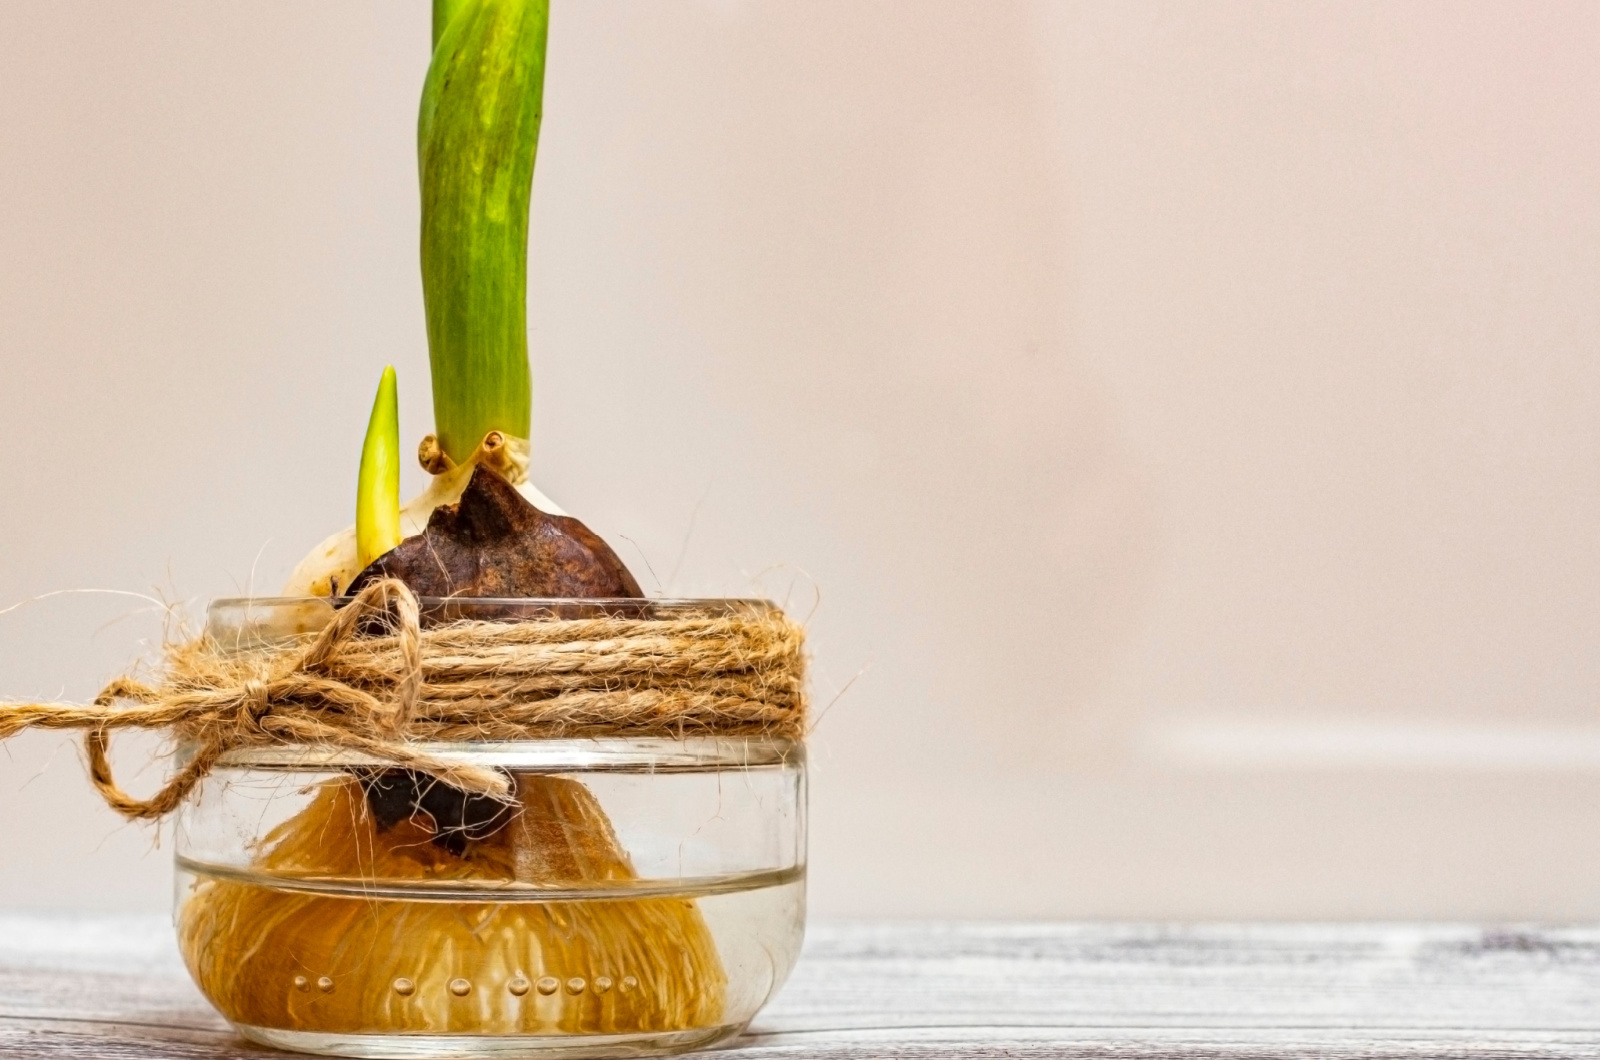 A tulip bulb sprouts in a glass jar